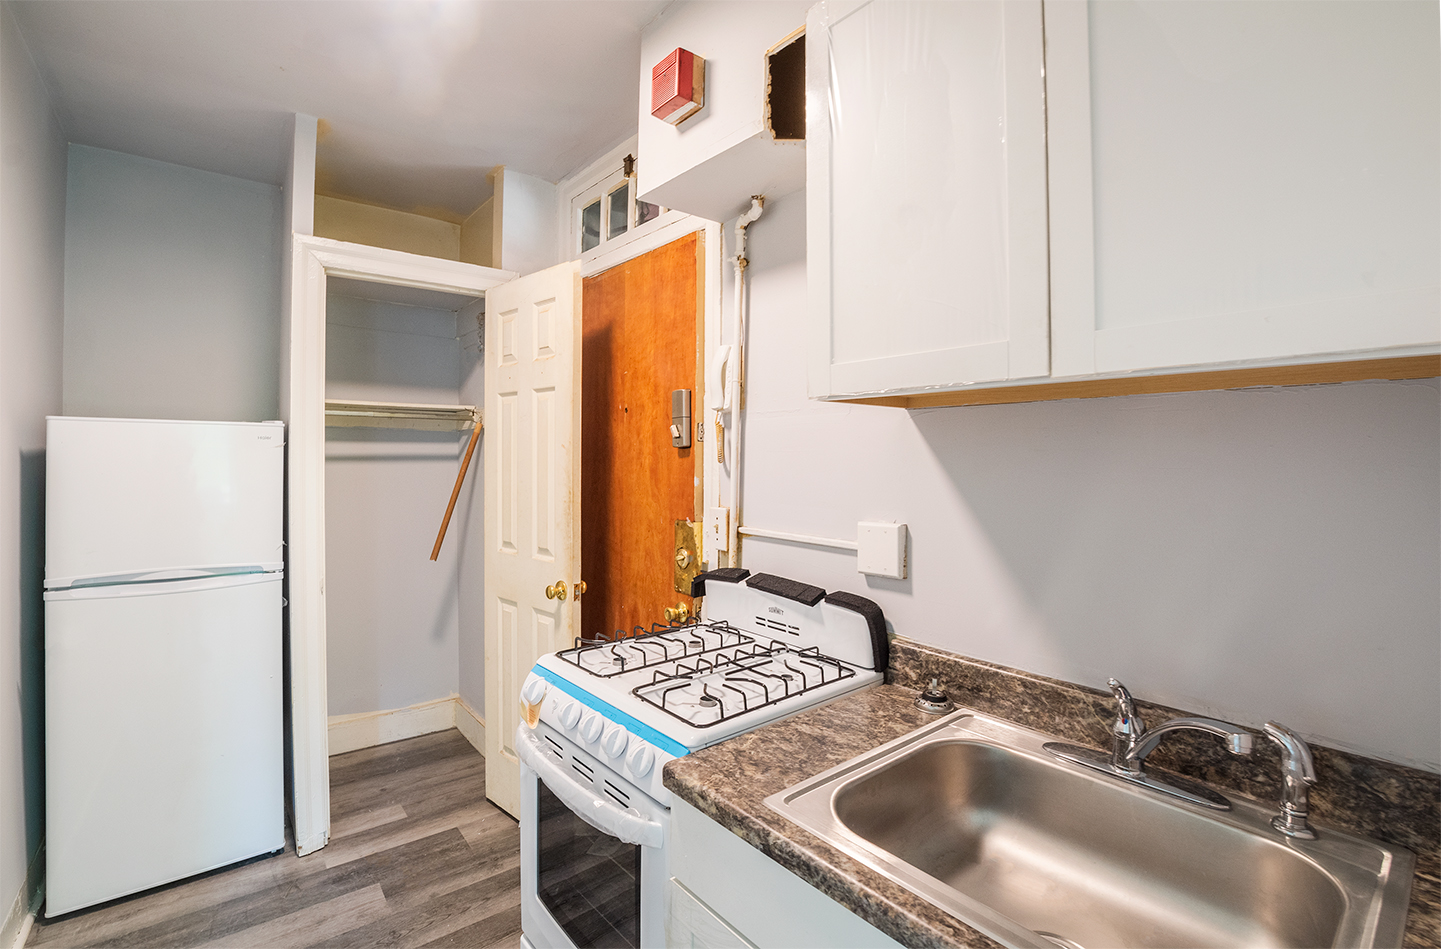 Property Photo For 2115 N. 63rd St, Unit 3E